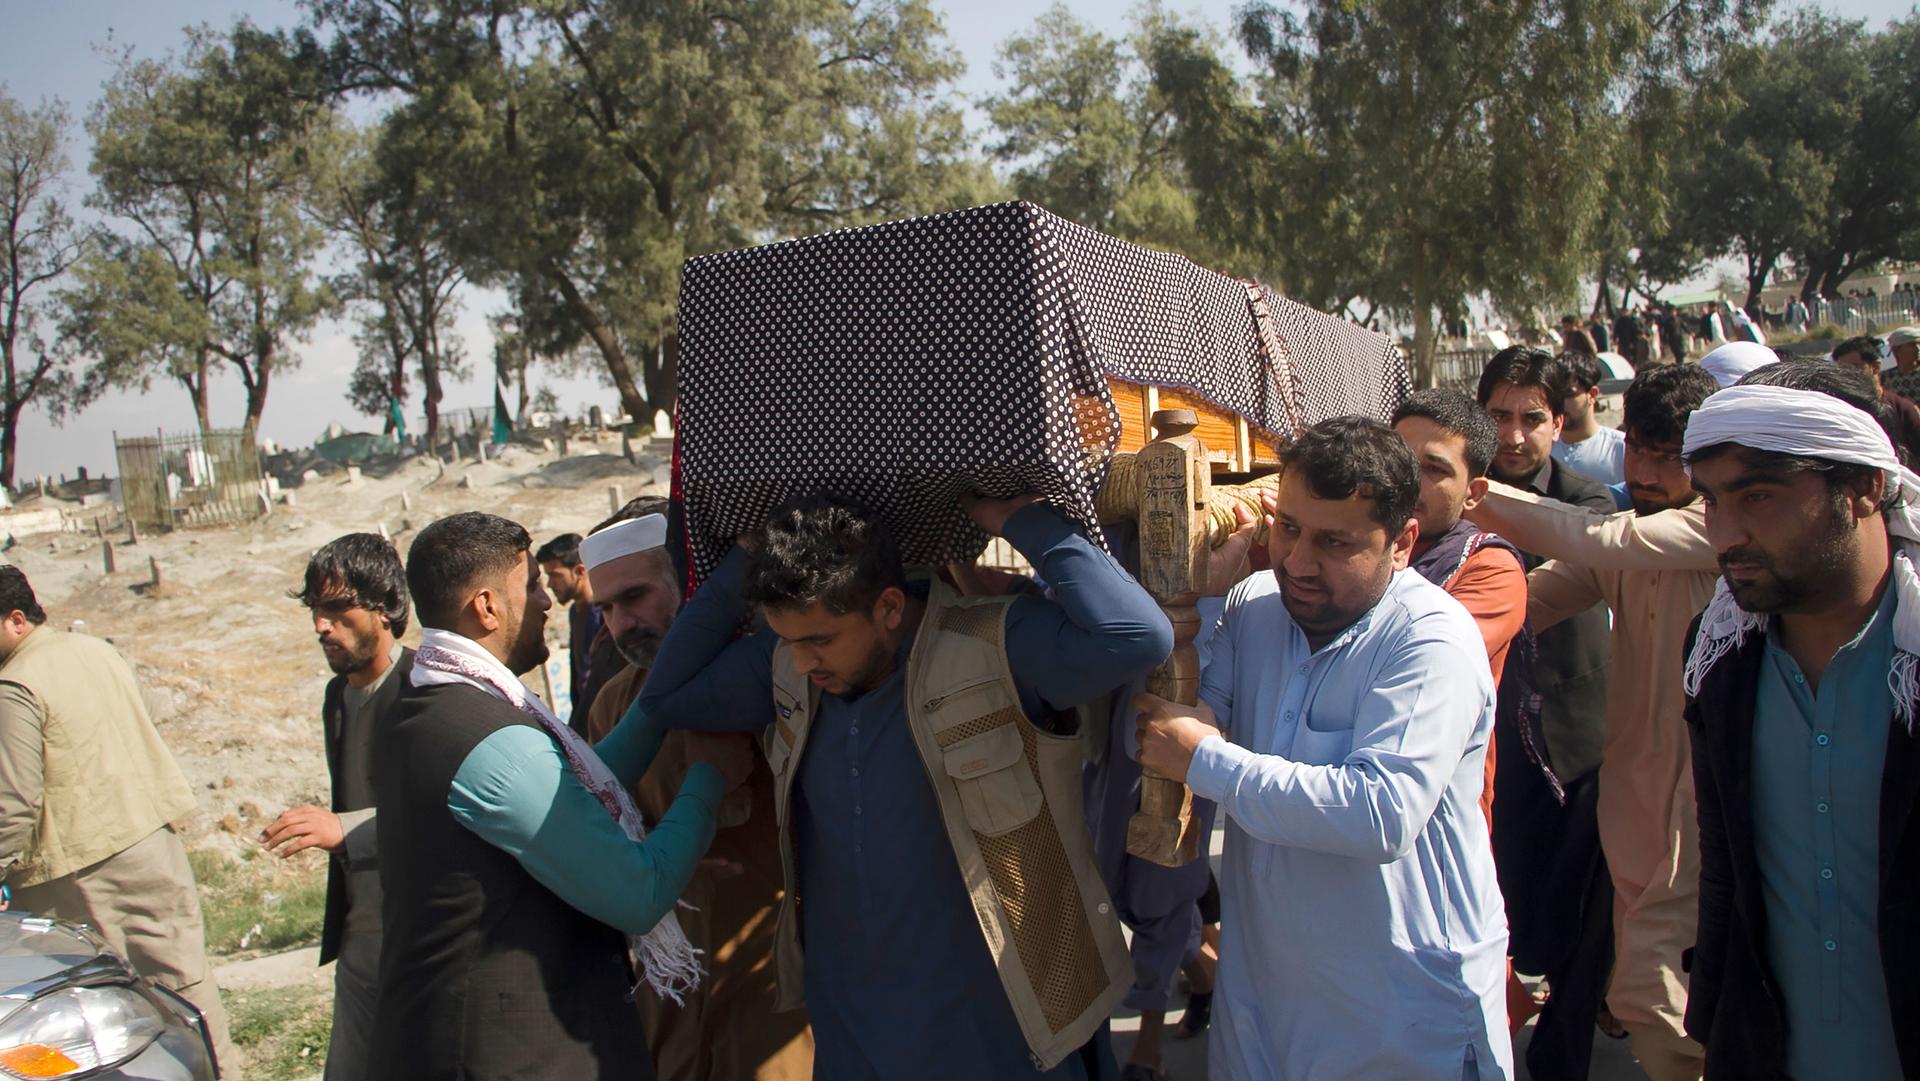 A group of men are shown carrying a casket on their shoulders drapped with a blanket.